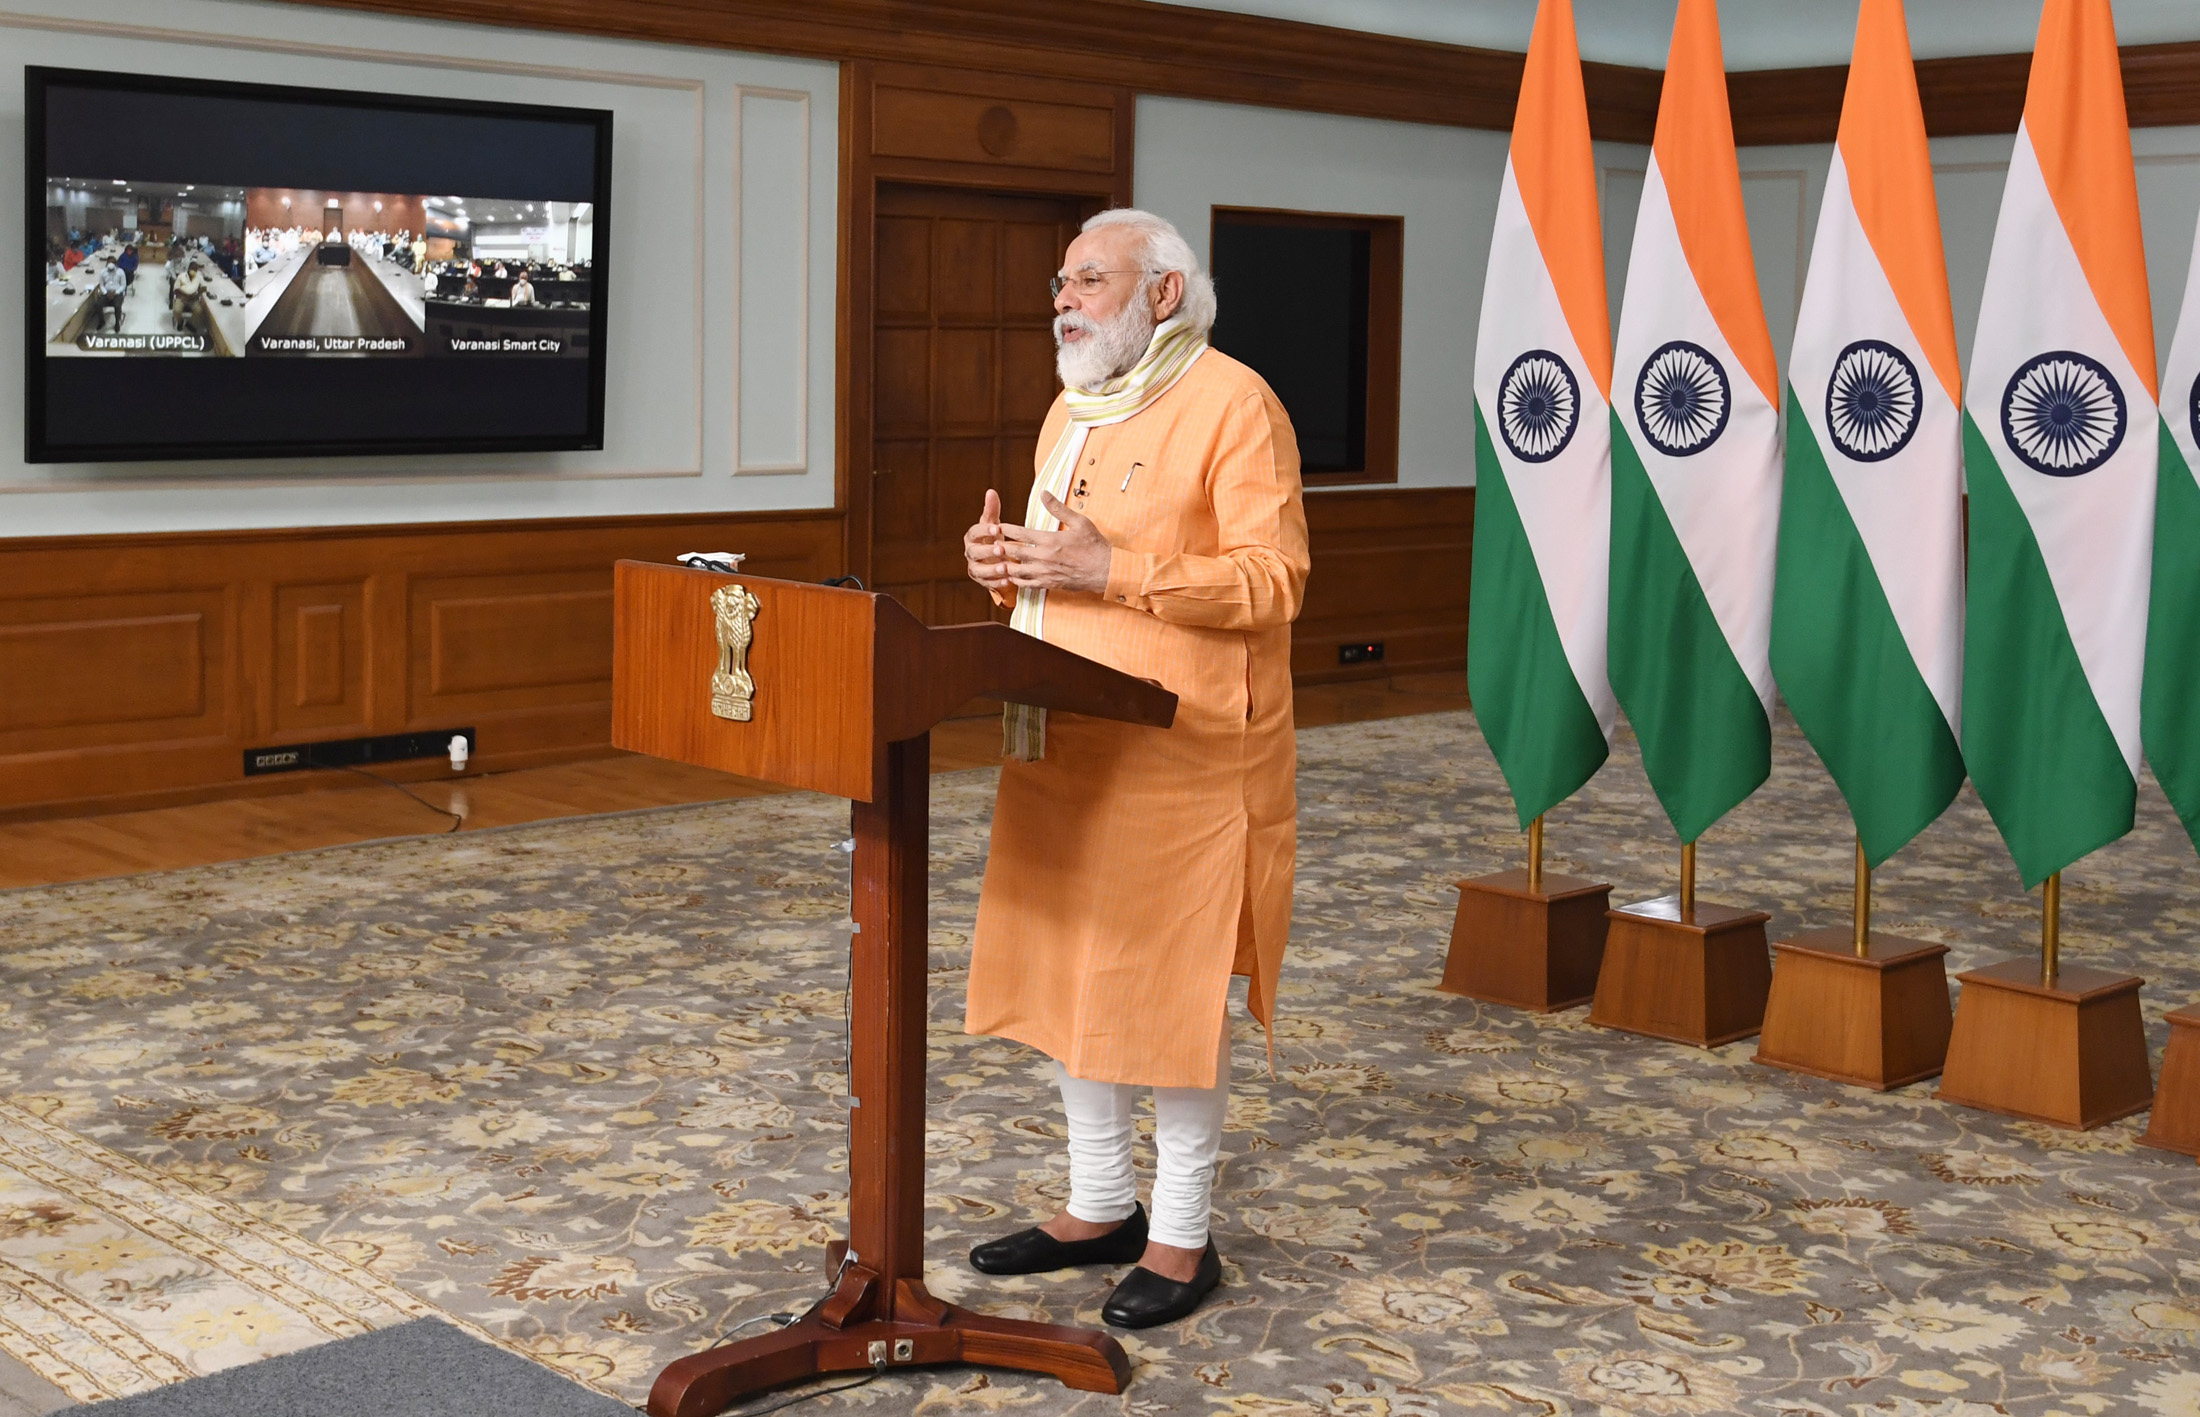 The Prime Minister, Shri Narendra Modi interacts with representatives from Varanasi based NGOs via video conference, in New Delhi on July 09, 2020.